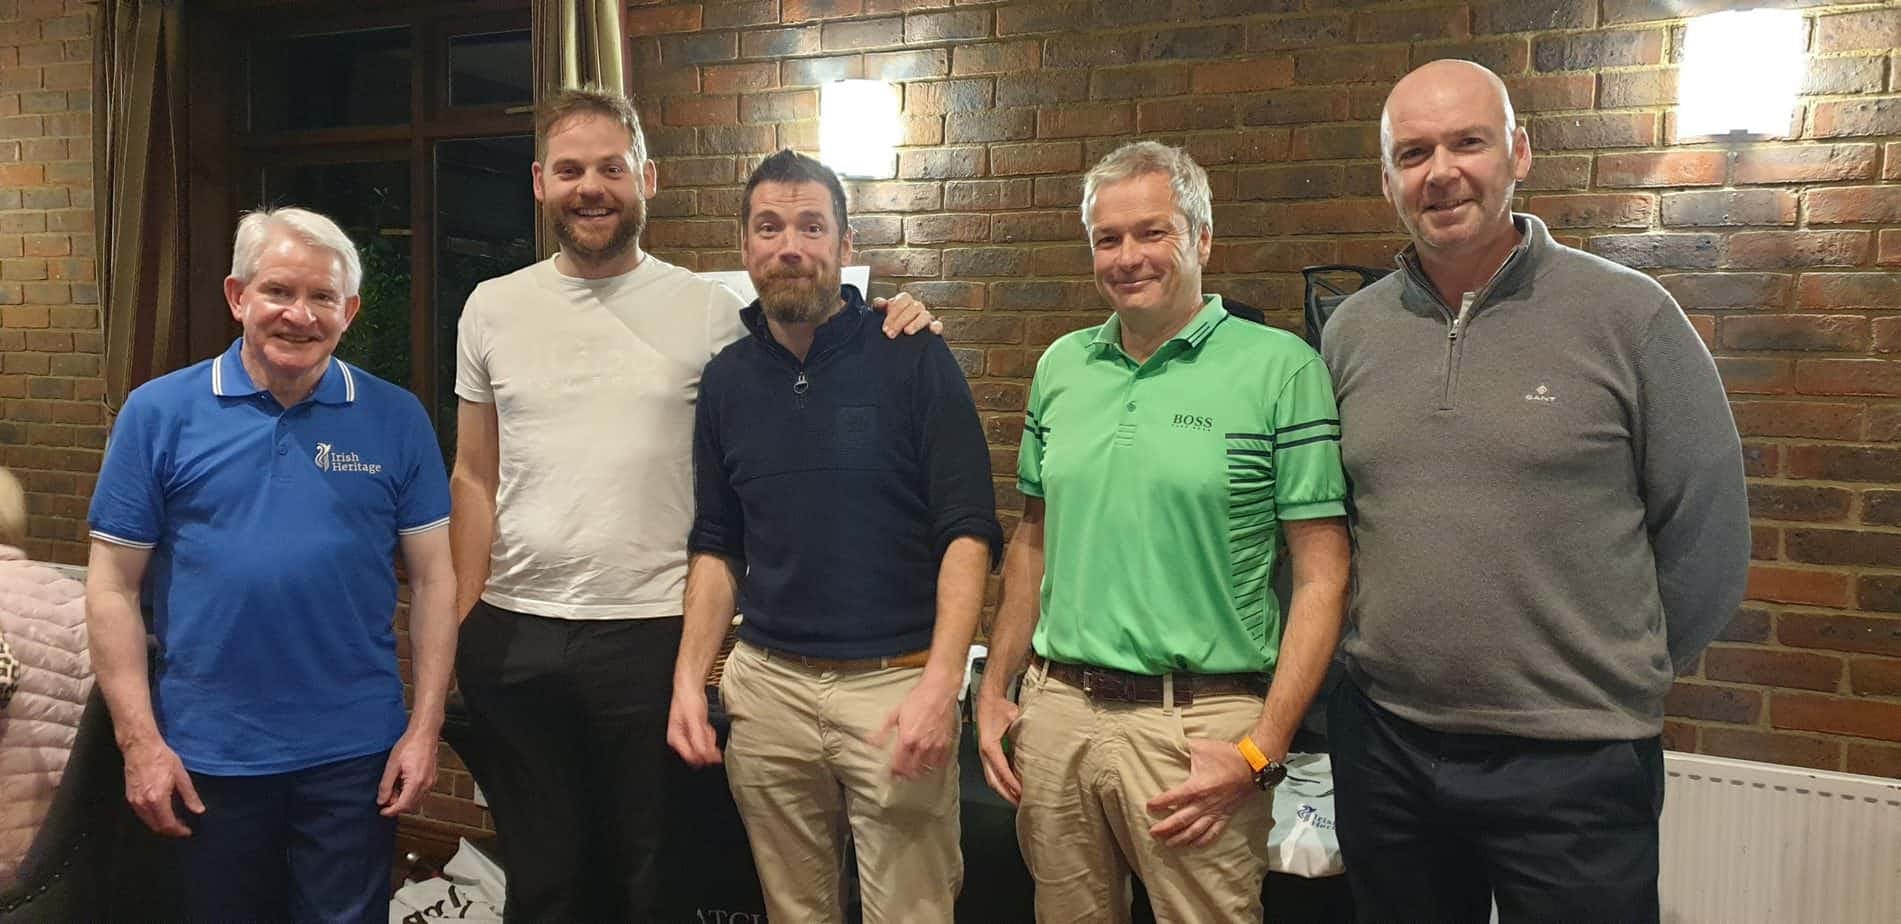 Irish Heritage’s Trustee and golf day organiser Tom Scanlon (on left) is pictured with the members of the winning team at the 2020 Golf Day at Batchworth Park, representing Elite Metalcraft are (left to right): David O’Sullivan, Cathal Vaughan, Padraig Collins and Gearoid O’Sullivan.